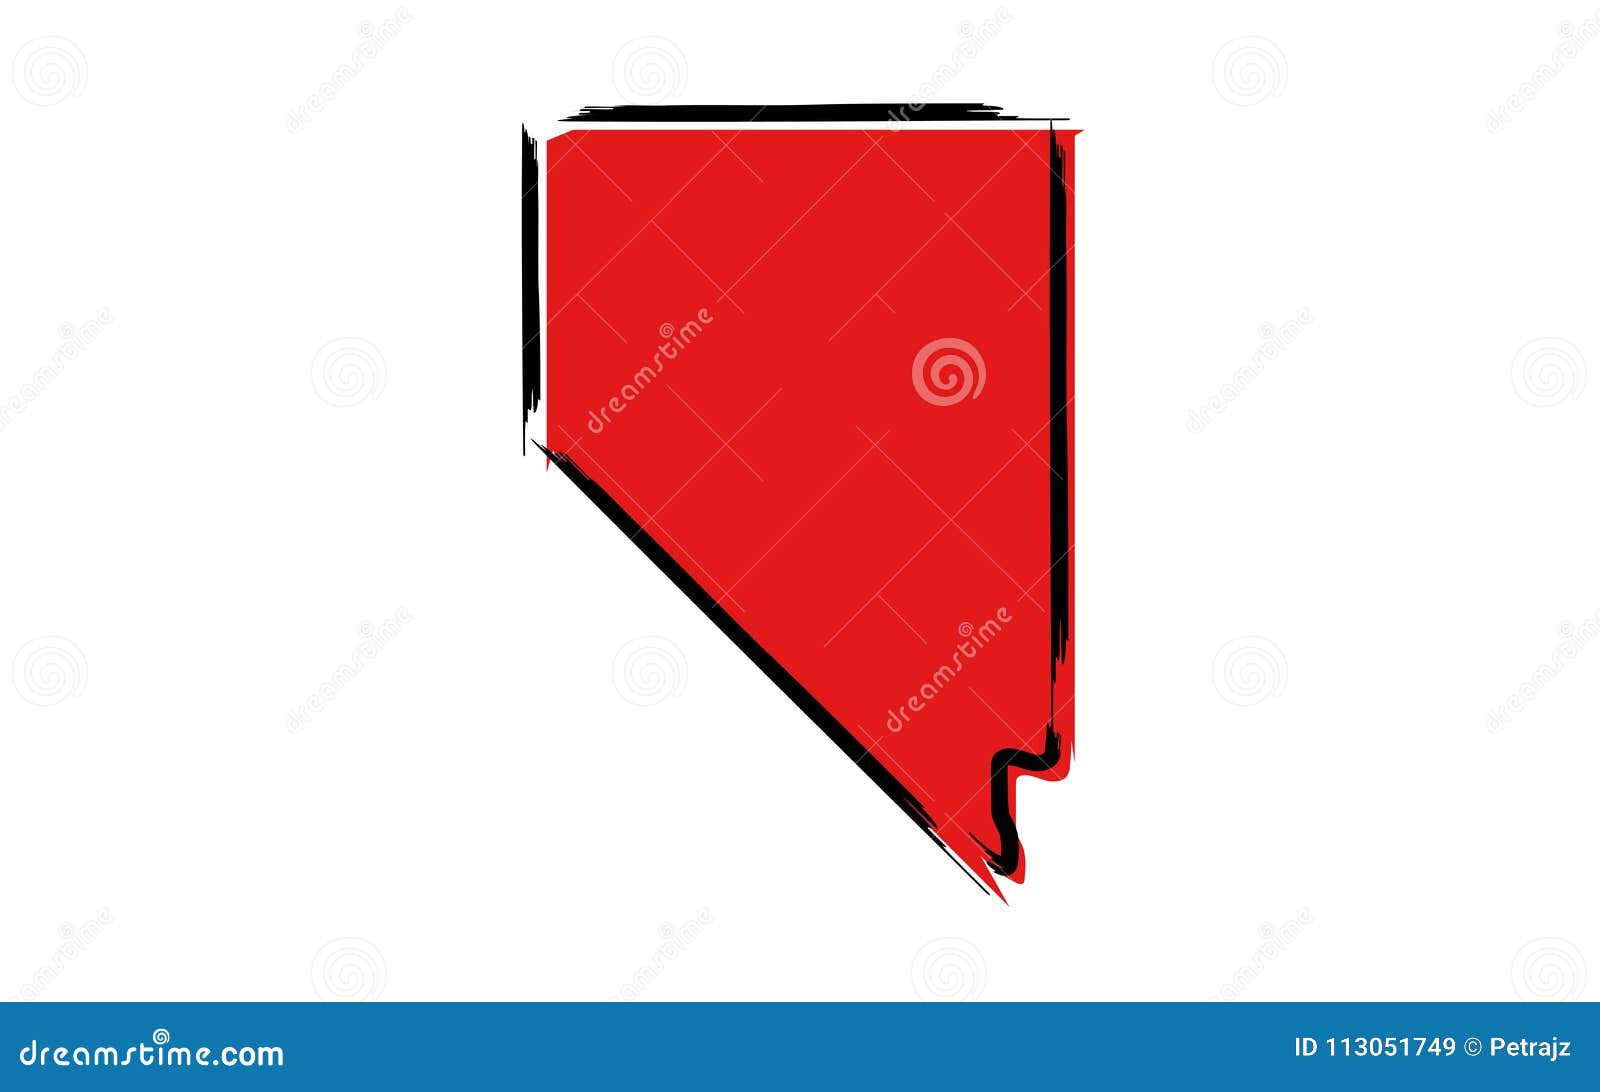 red sketch map of nevada